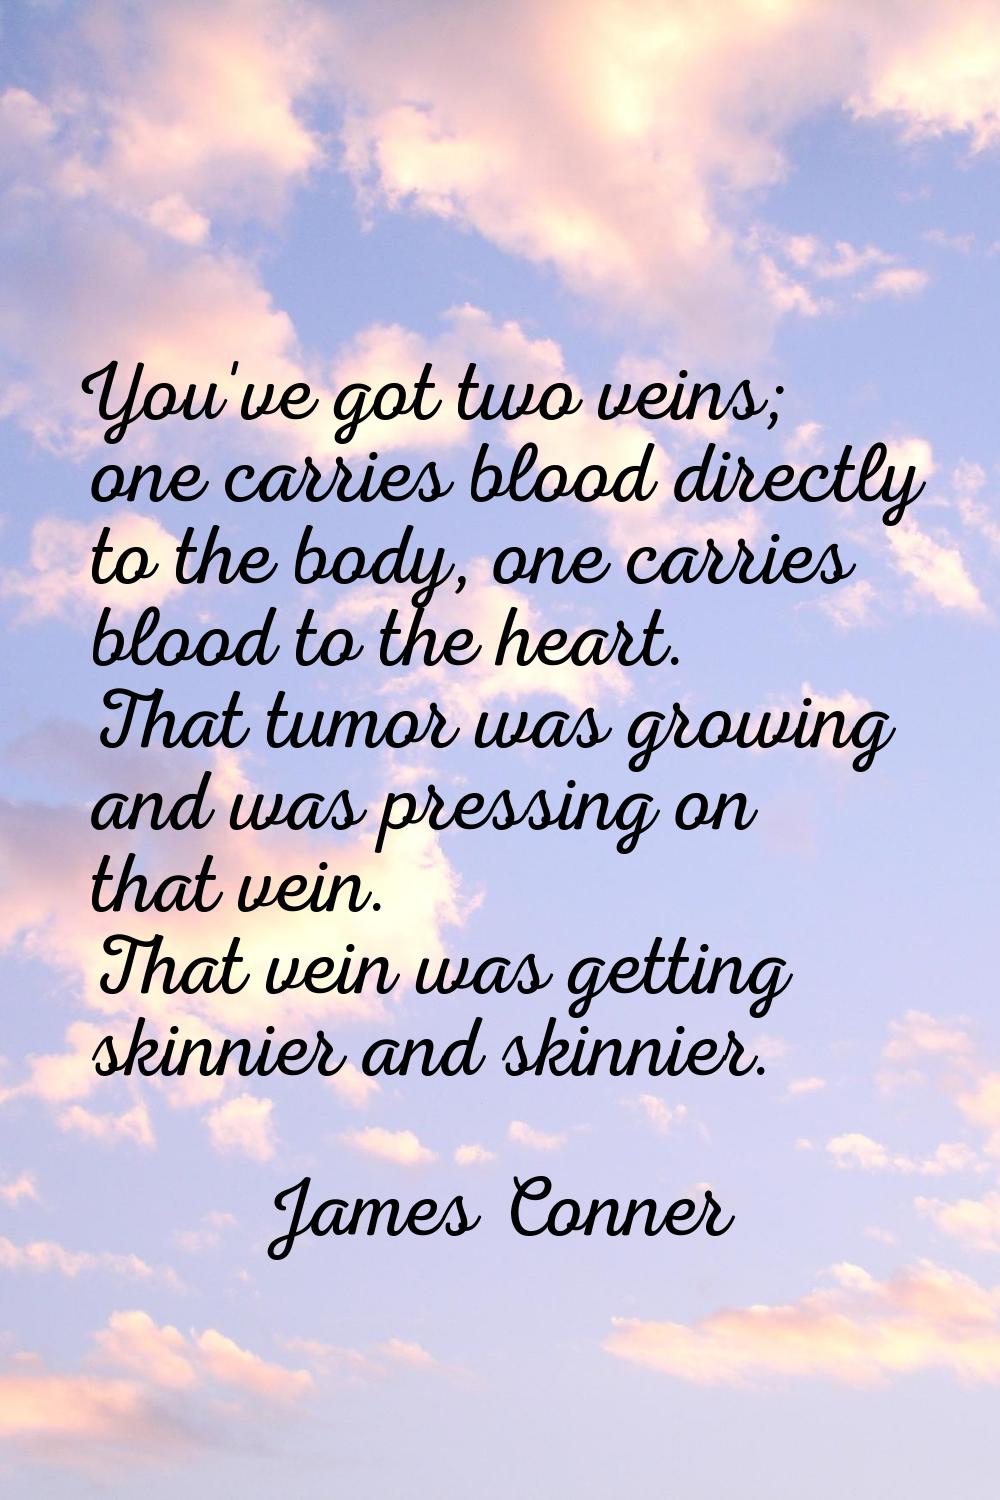 You've got two veins; one carries blood directly to the body, one carries blood to the heart. That 